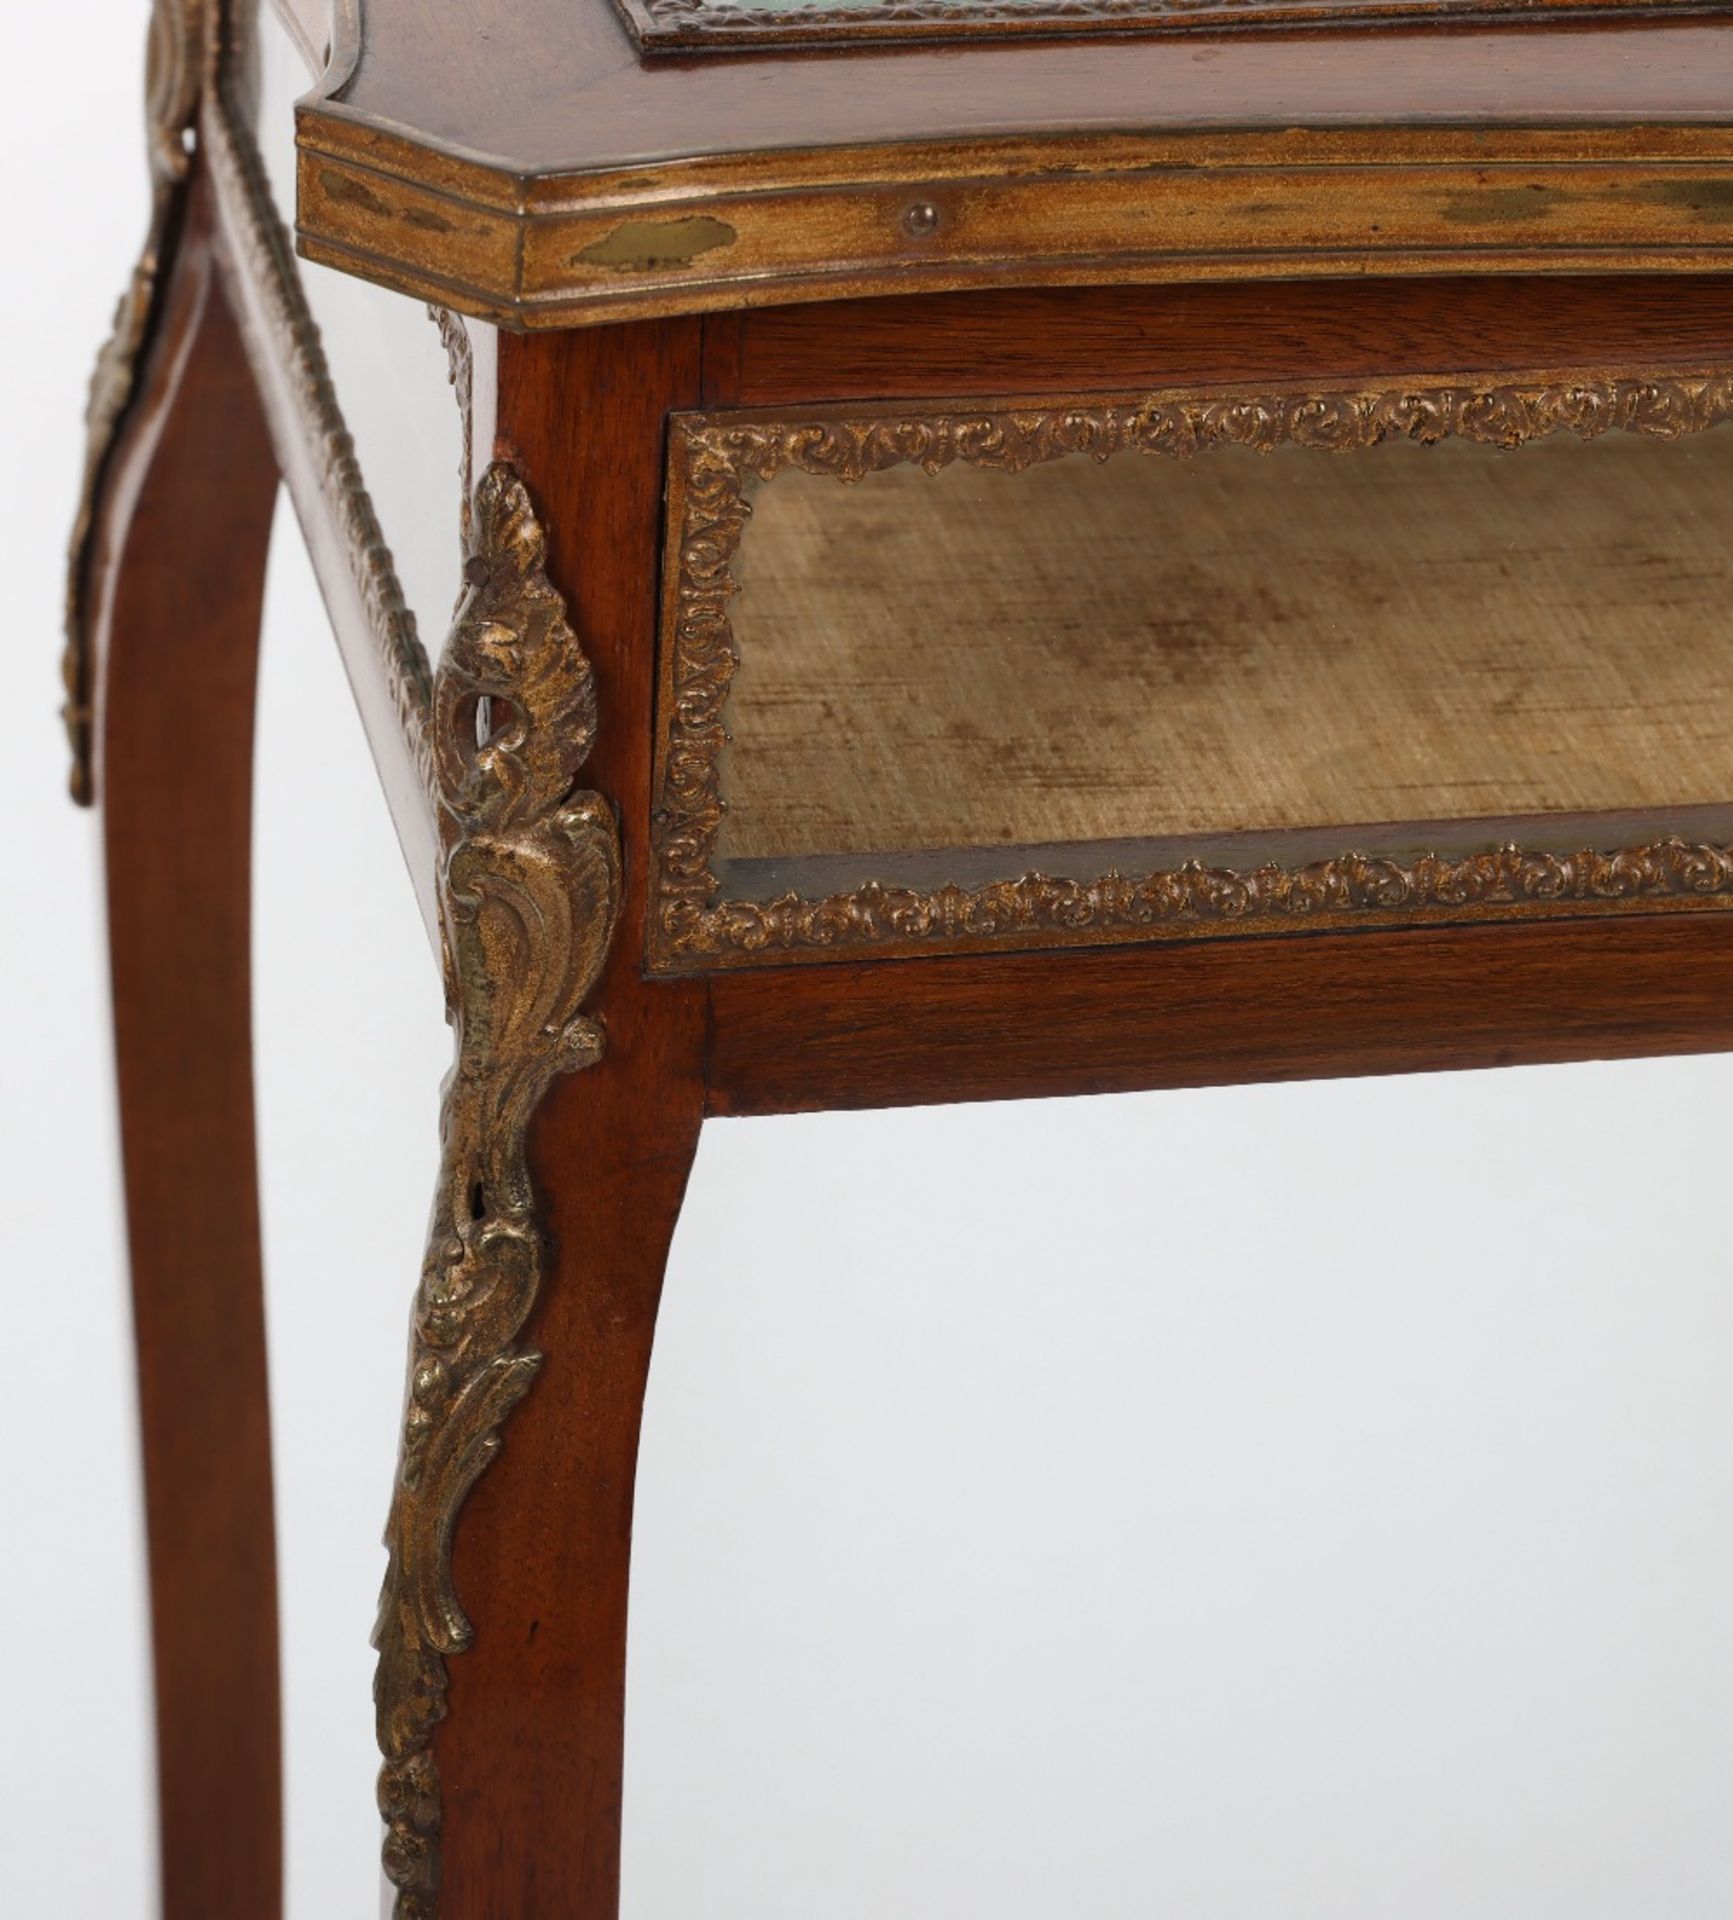 A French mahogany serpentine Bijouterie table in Louis XV style, probably late 19th century - Image 3 of 12